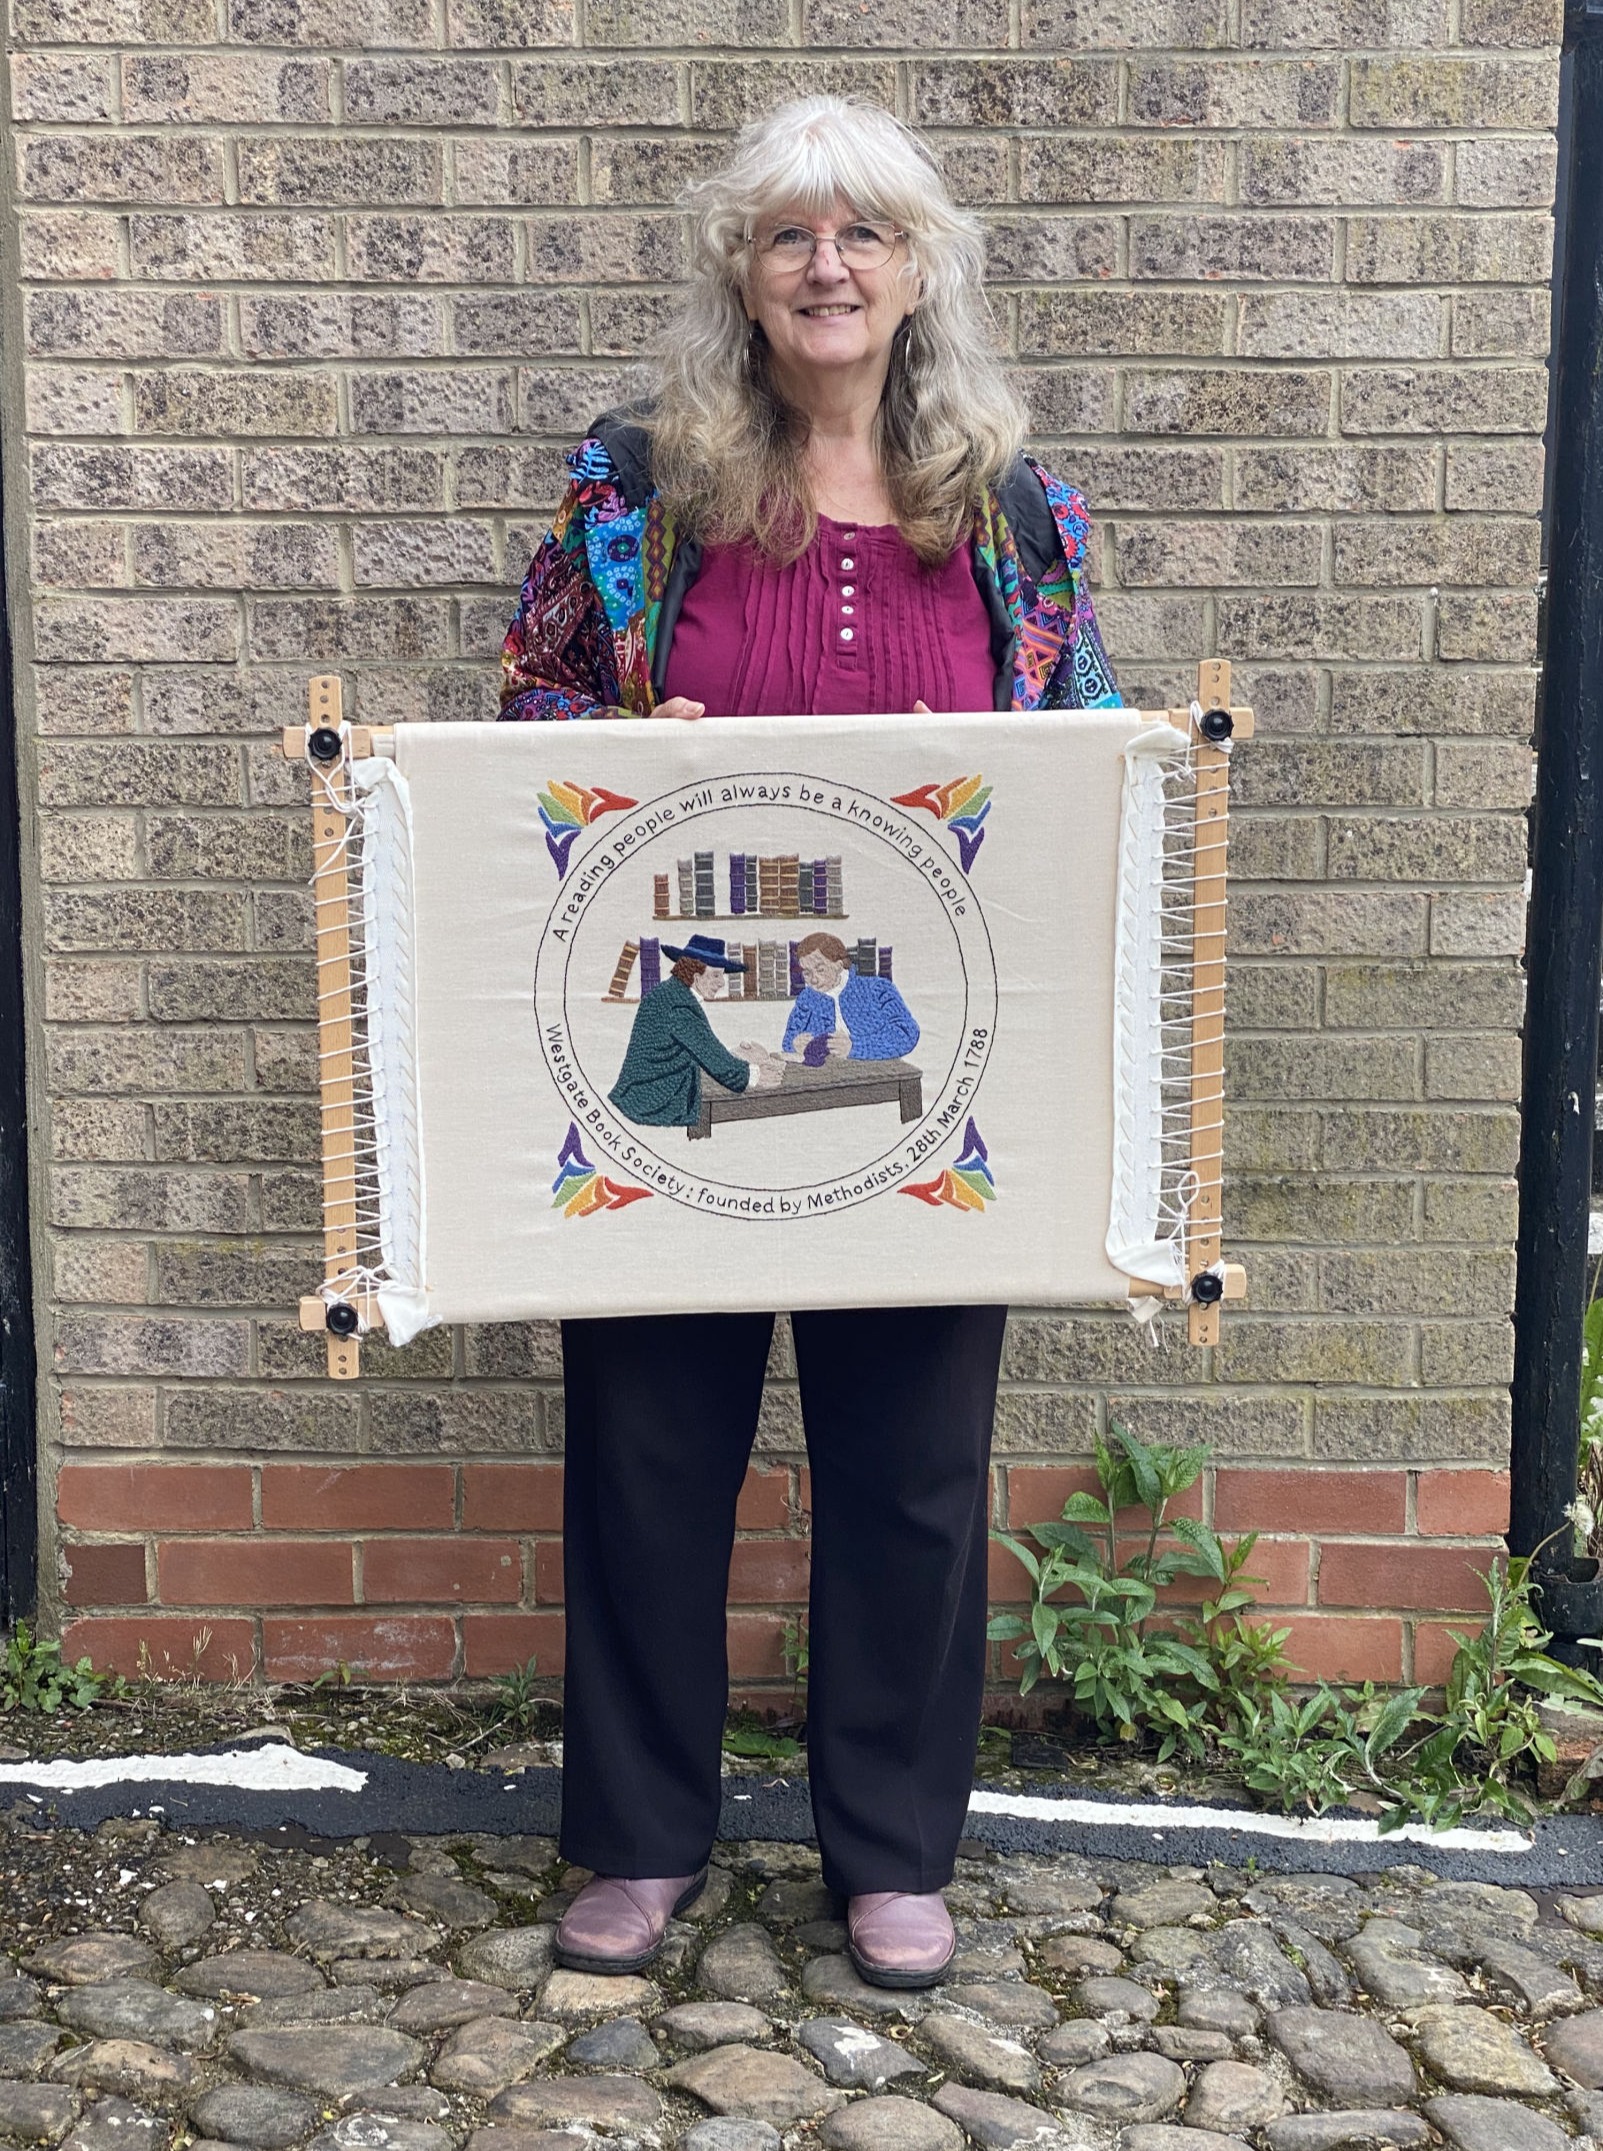 Victoria the stitcher holding the finished tapestry